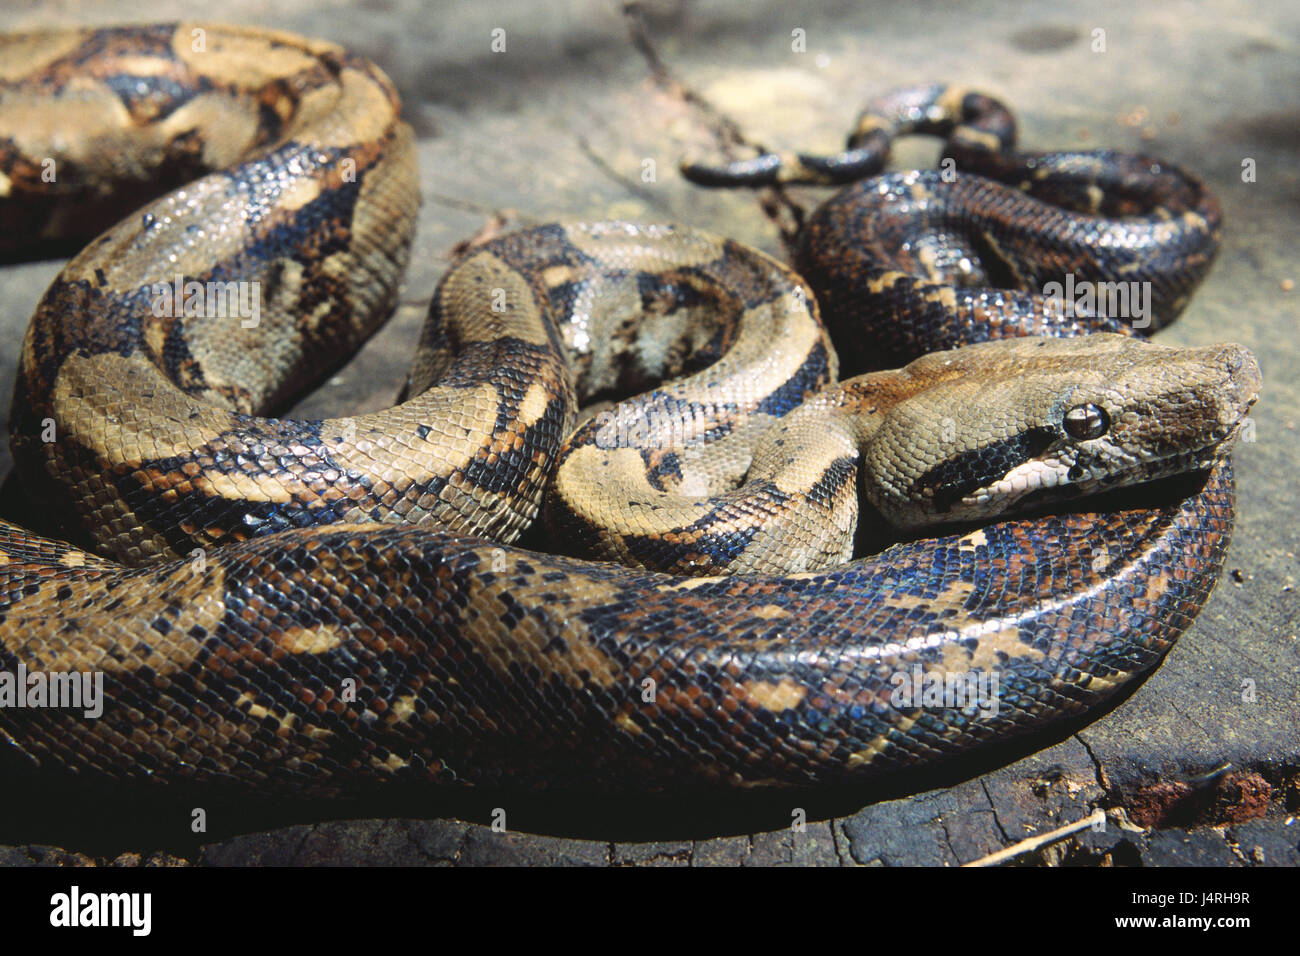 Epicrates cenchria, Regenbogenboa, full-grown, adult, nature, Wildlife, animal, wild animal, reptile, queue, Boa, Würgeschlange, camouflage, scales, fluorescent, danger, dangerously, fear, phobia, brightly, nicely, colourfully, America, Central America, Costa Rica, La Cruz, Stock Photo